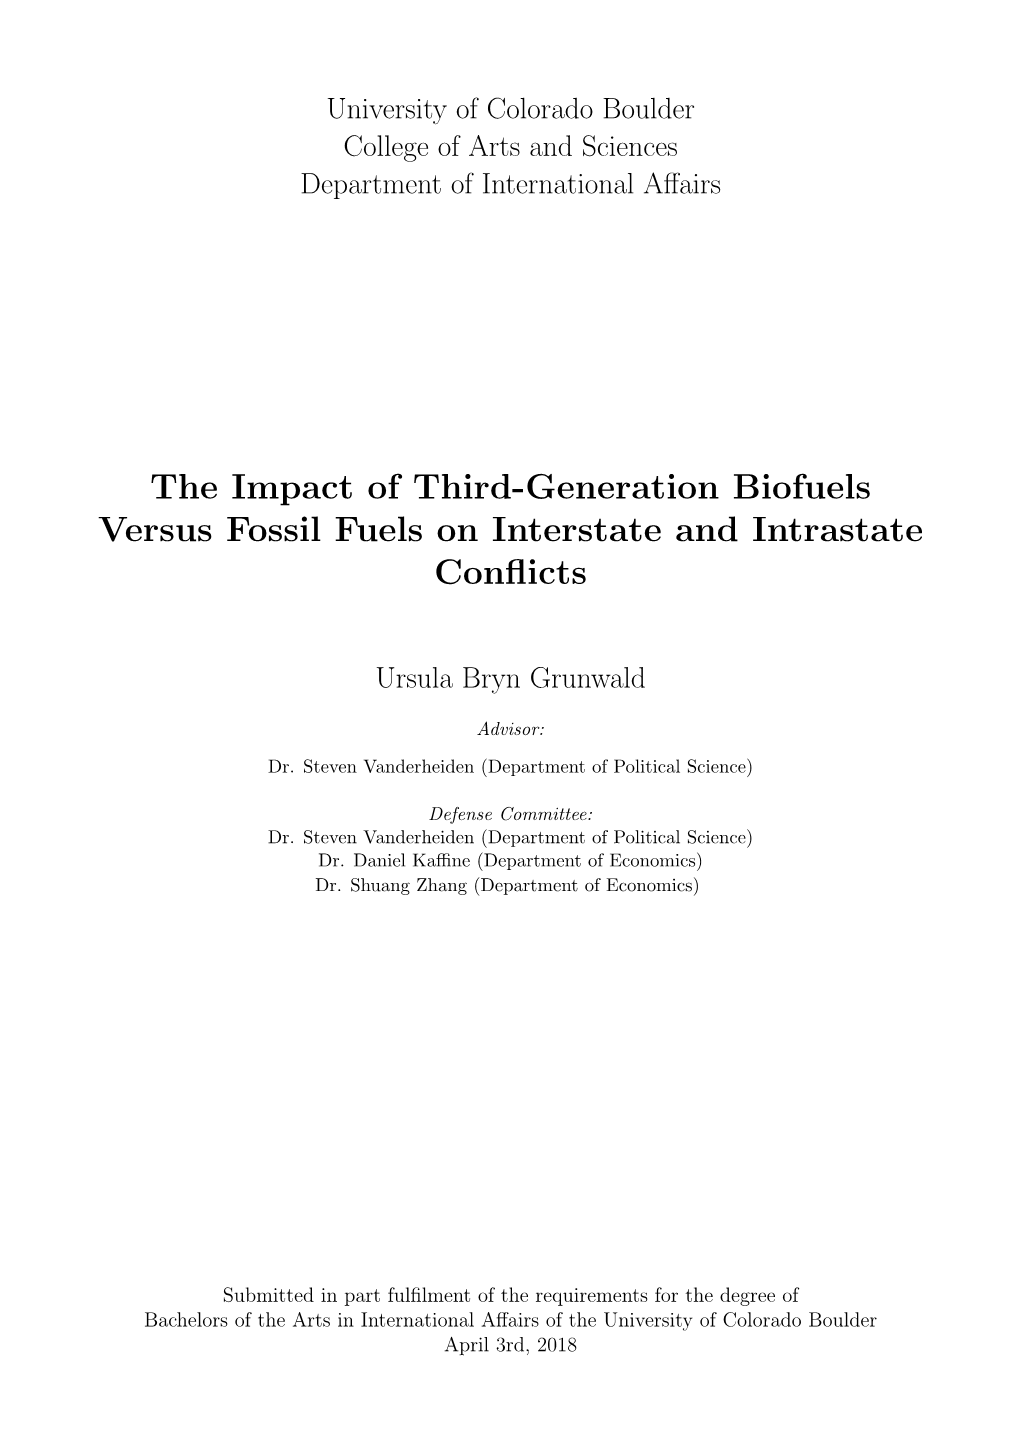 The Impact of Third-Generation Biofuels Versus Fossil Fuels on Interstate and Intrastate Conﬂicts